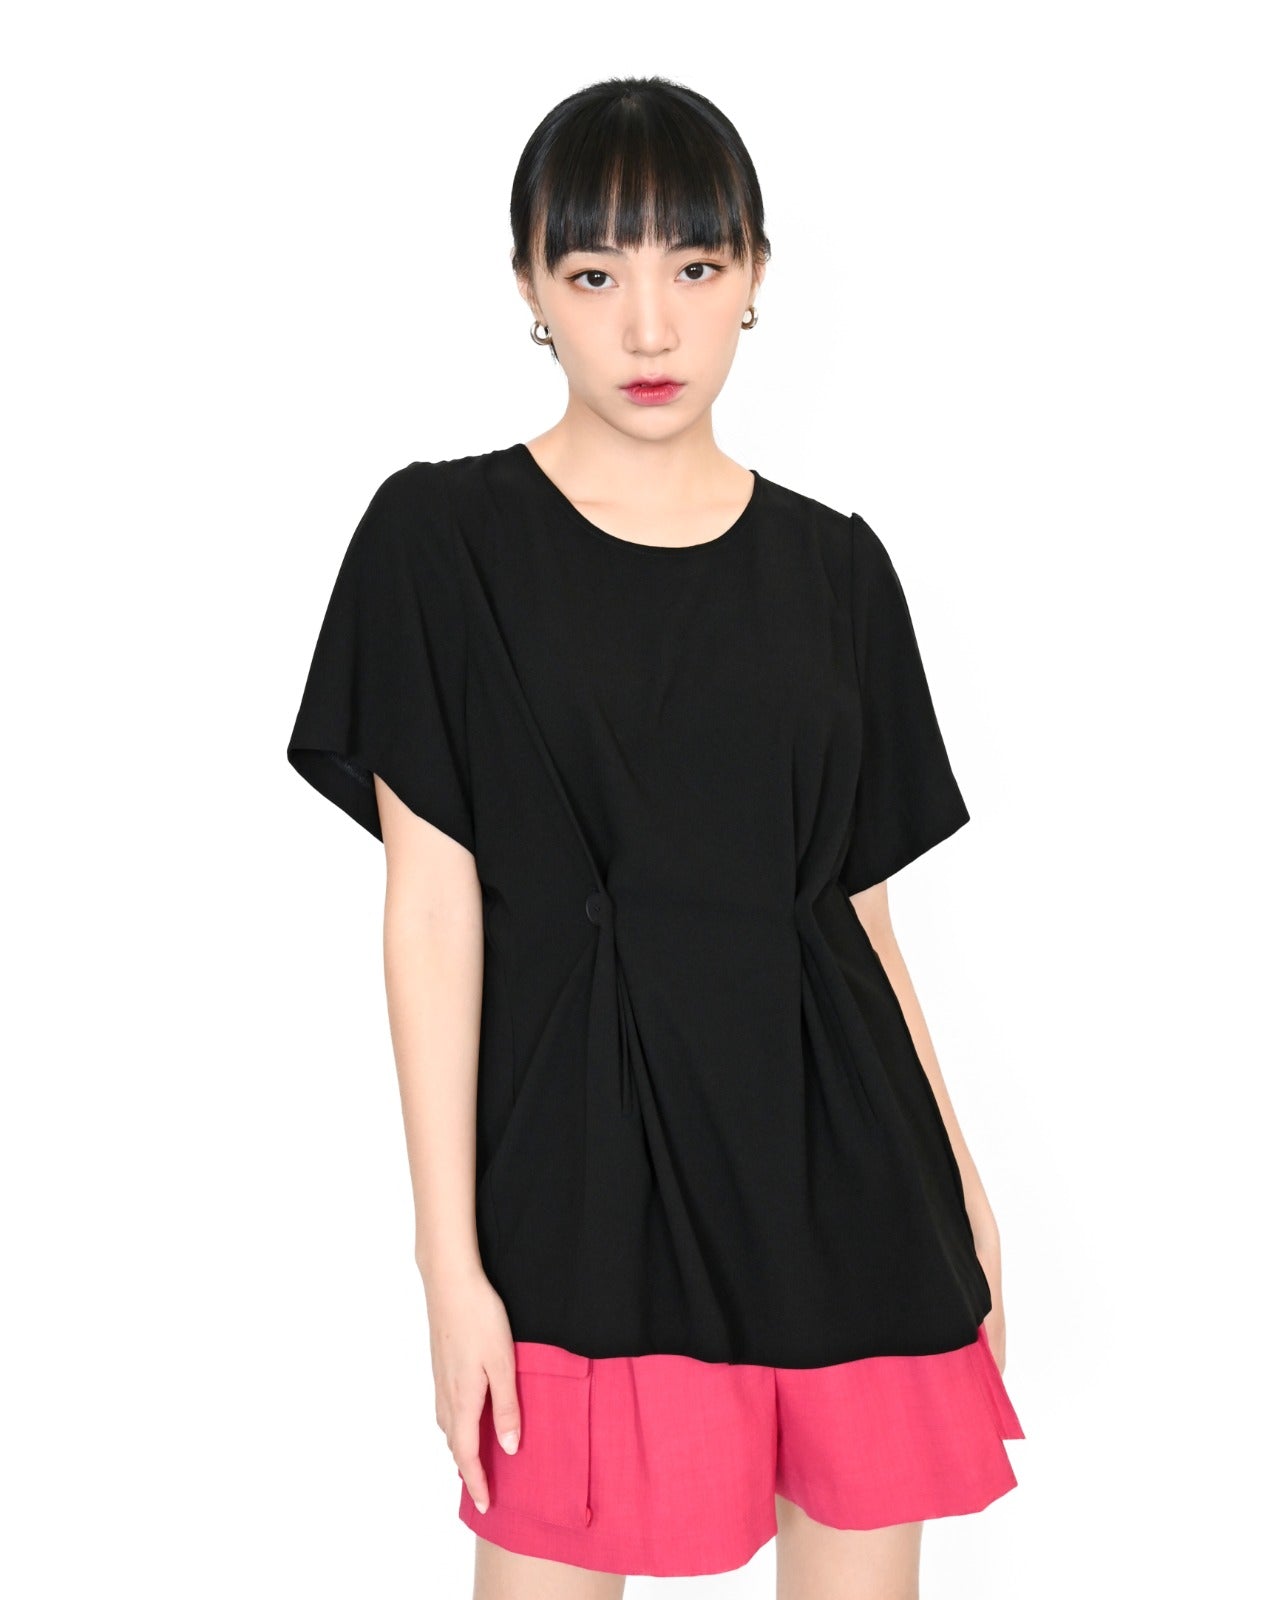 Load image into Gallery viewer, aalis YOKI Woven Tee with buttons detail (Black)
